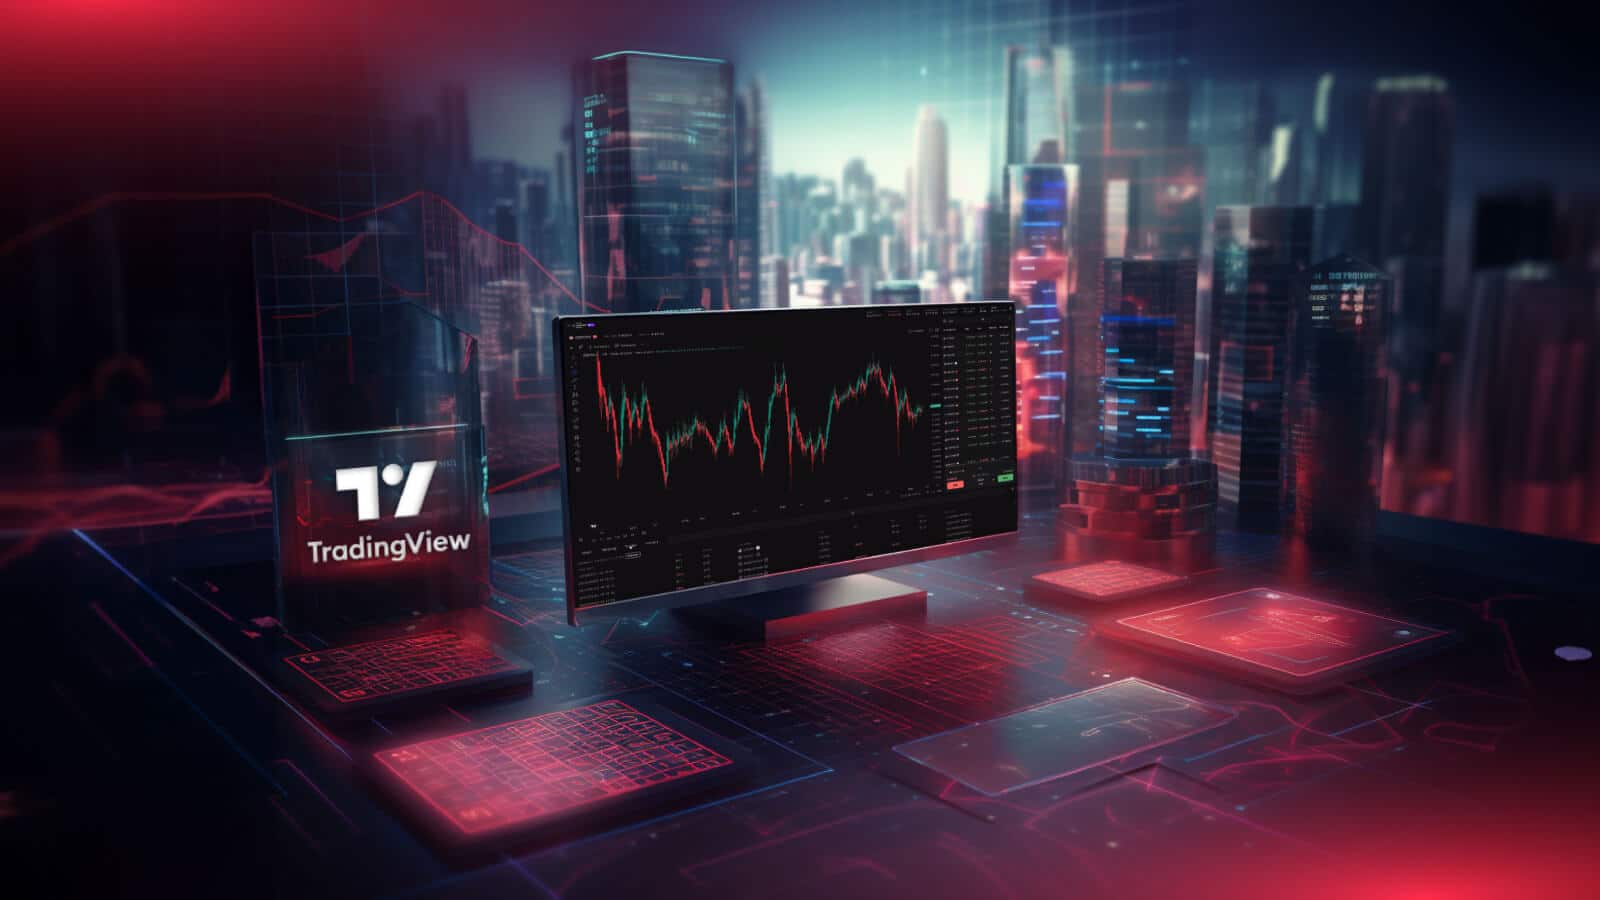 Futuristic trading desk of a prop trader using TradeLocker with TradingView charting